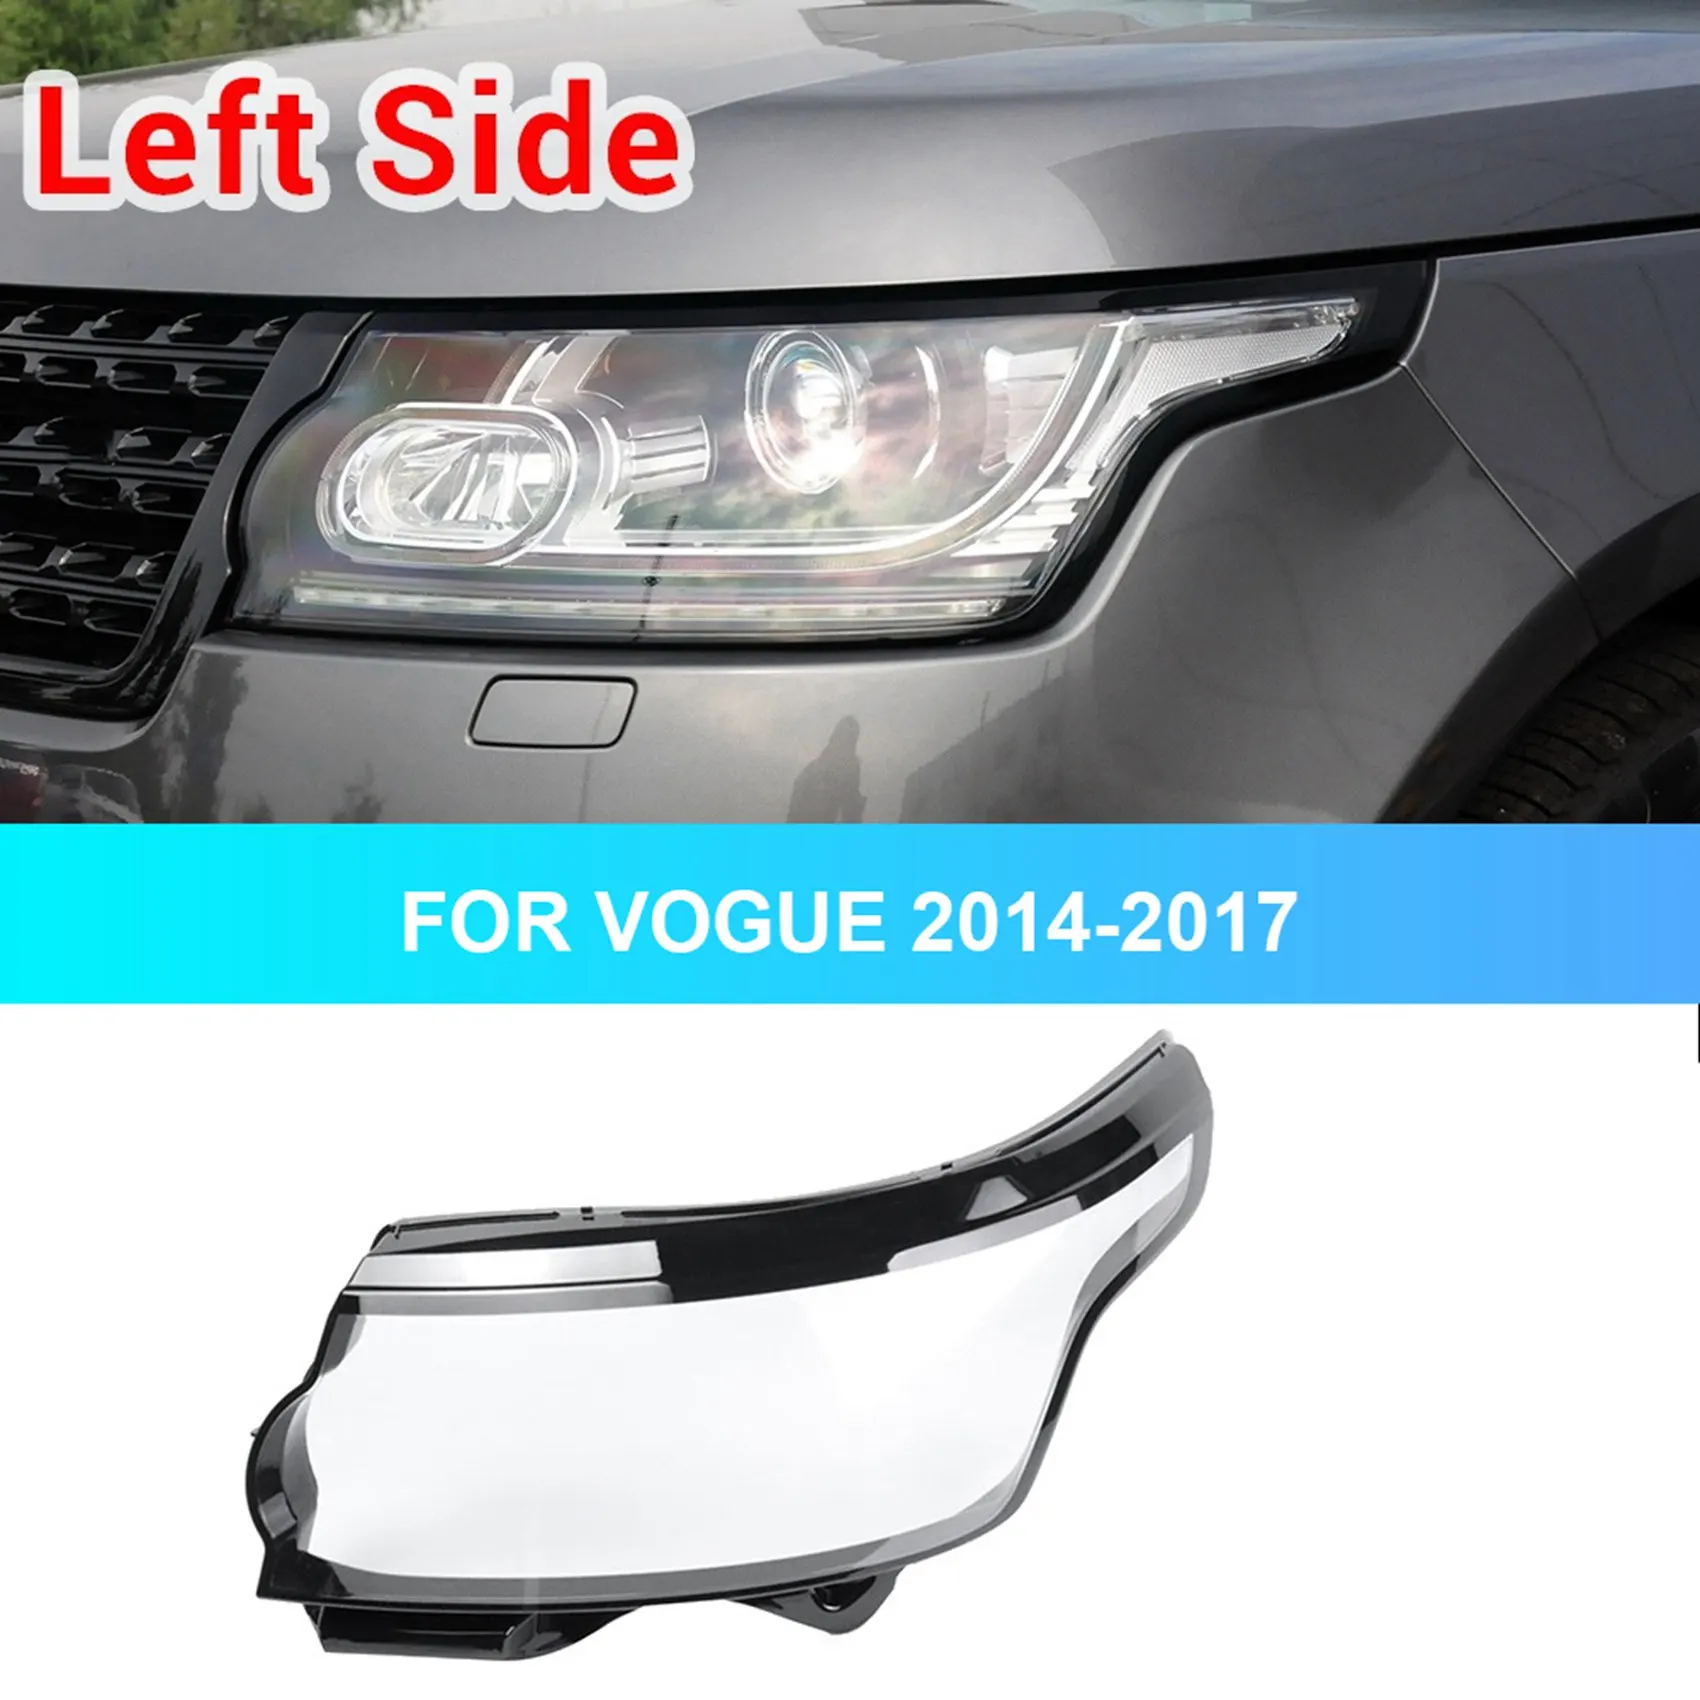 

Car Front Left Headlight Glass Head Light Lamps Lampshade Cover Lens for Land Rover Range Rover Vogue L405 2014-2017